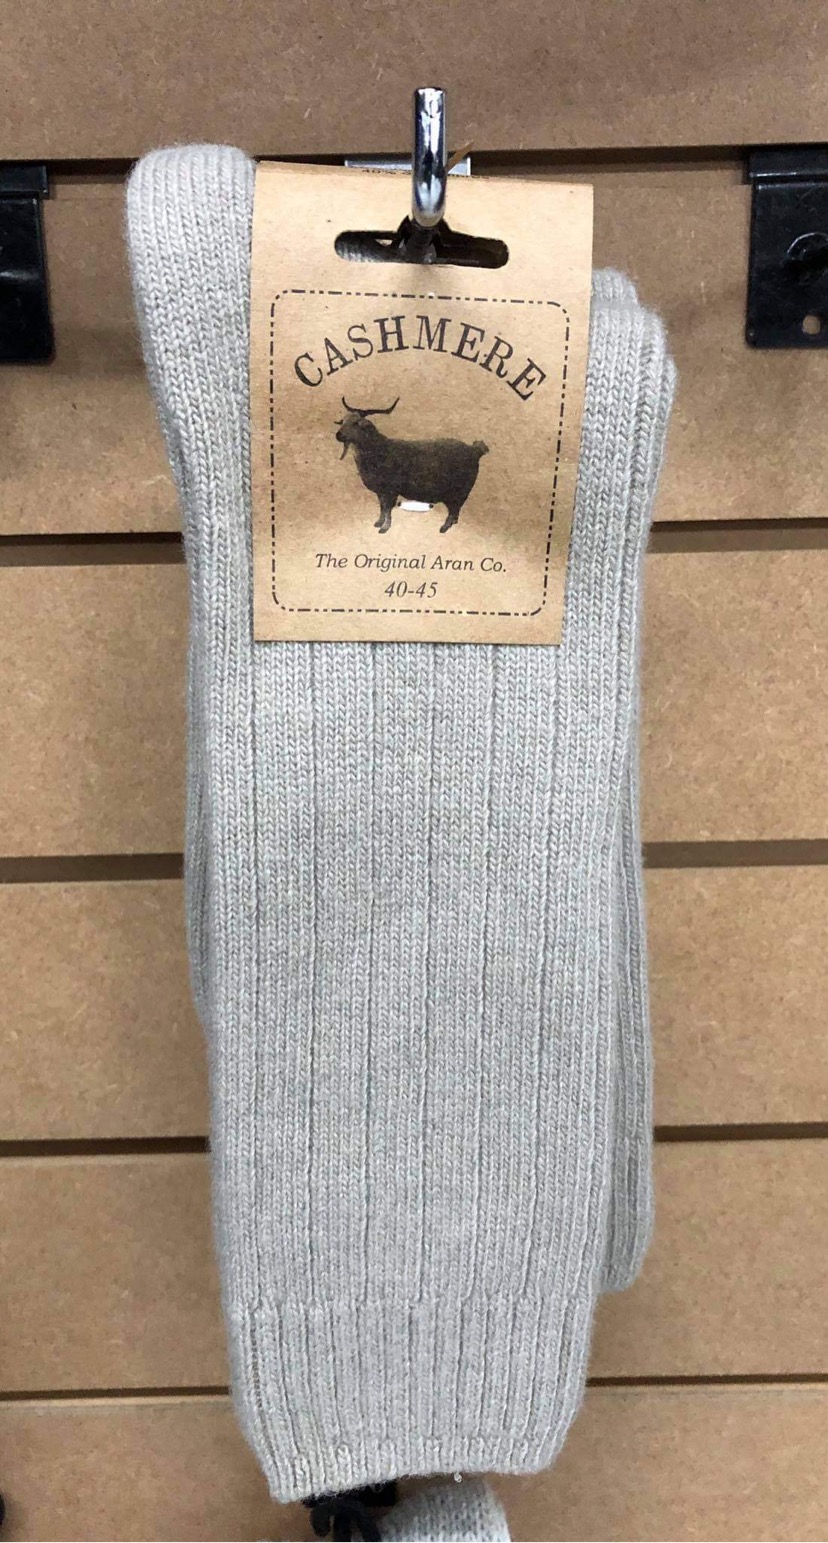 Cashmere and Wool Light Grey Socks in Size 7-11